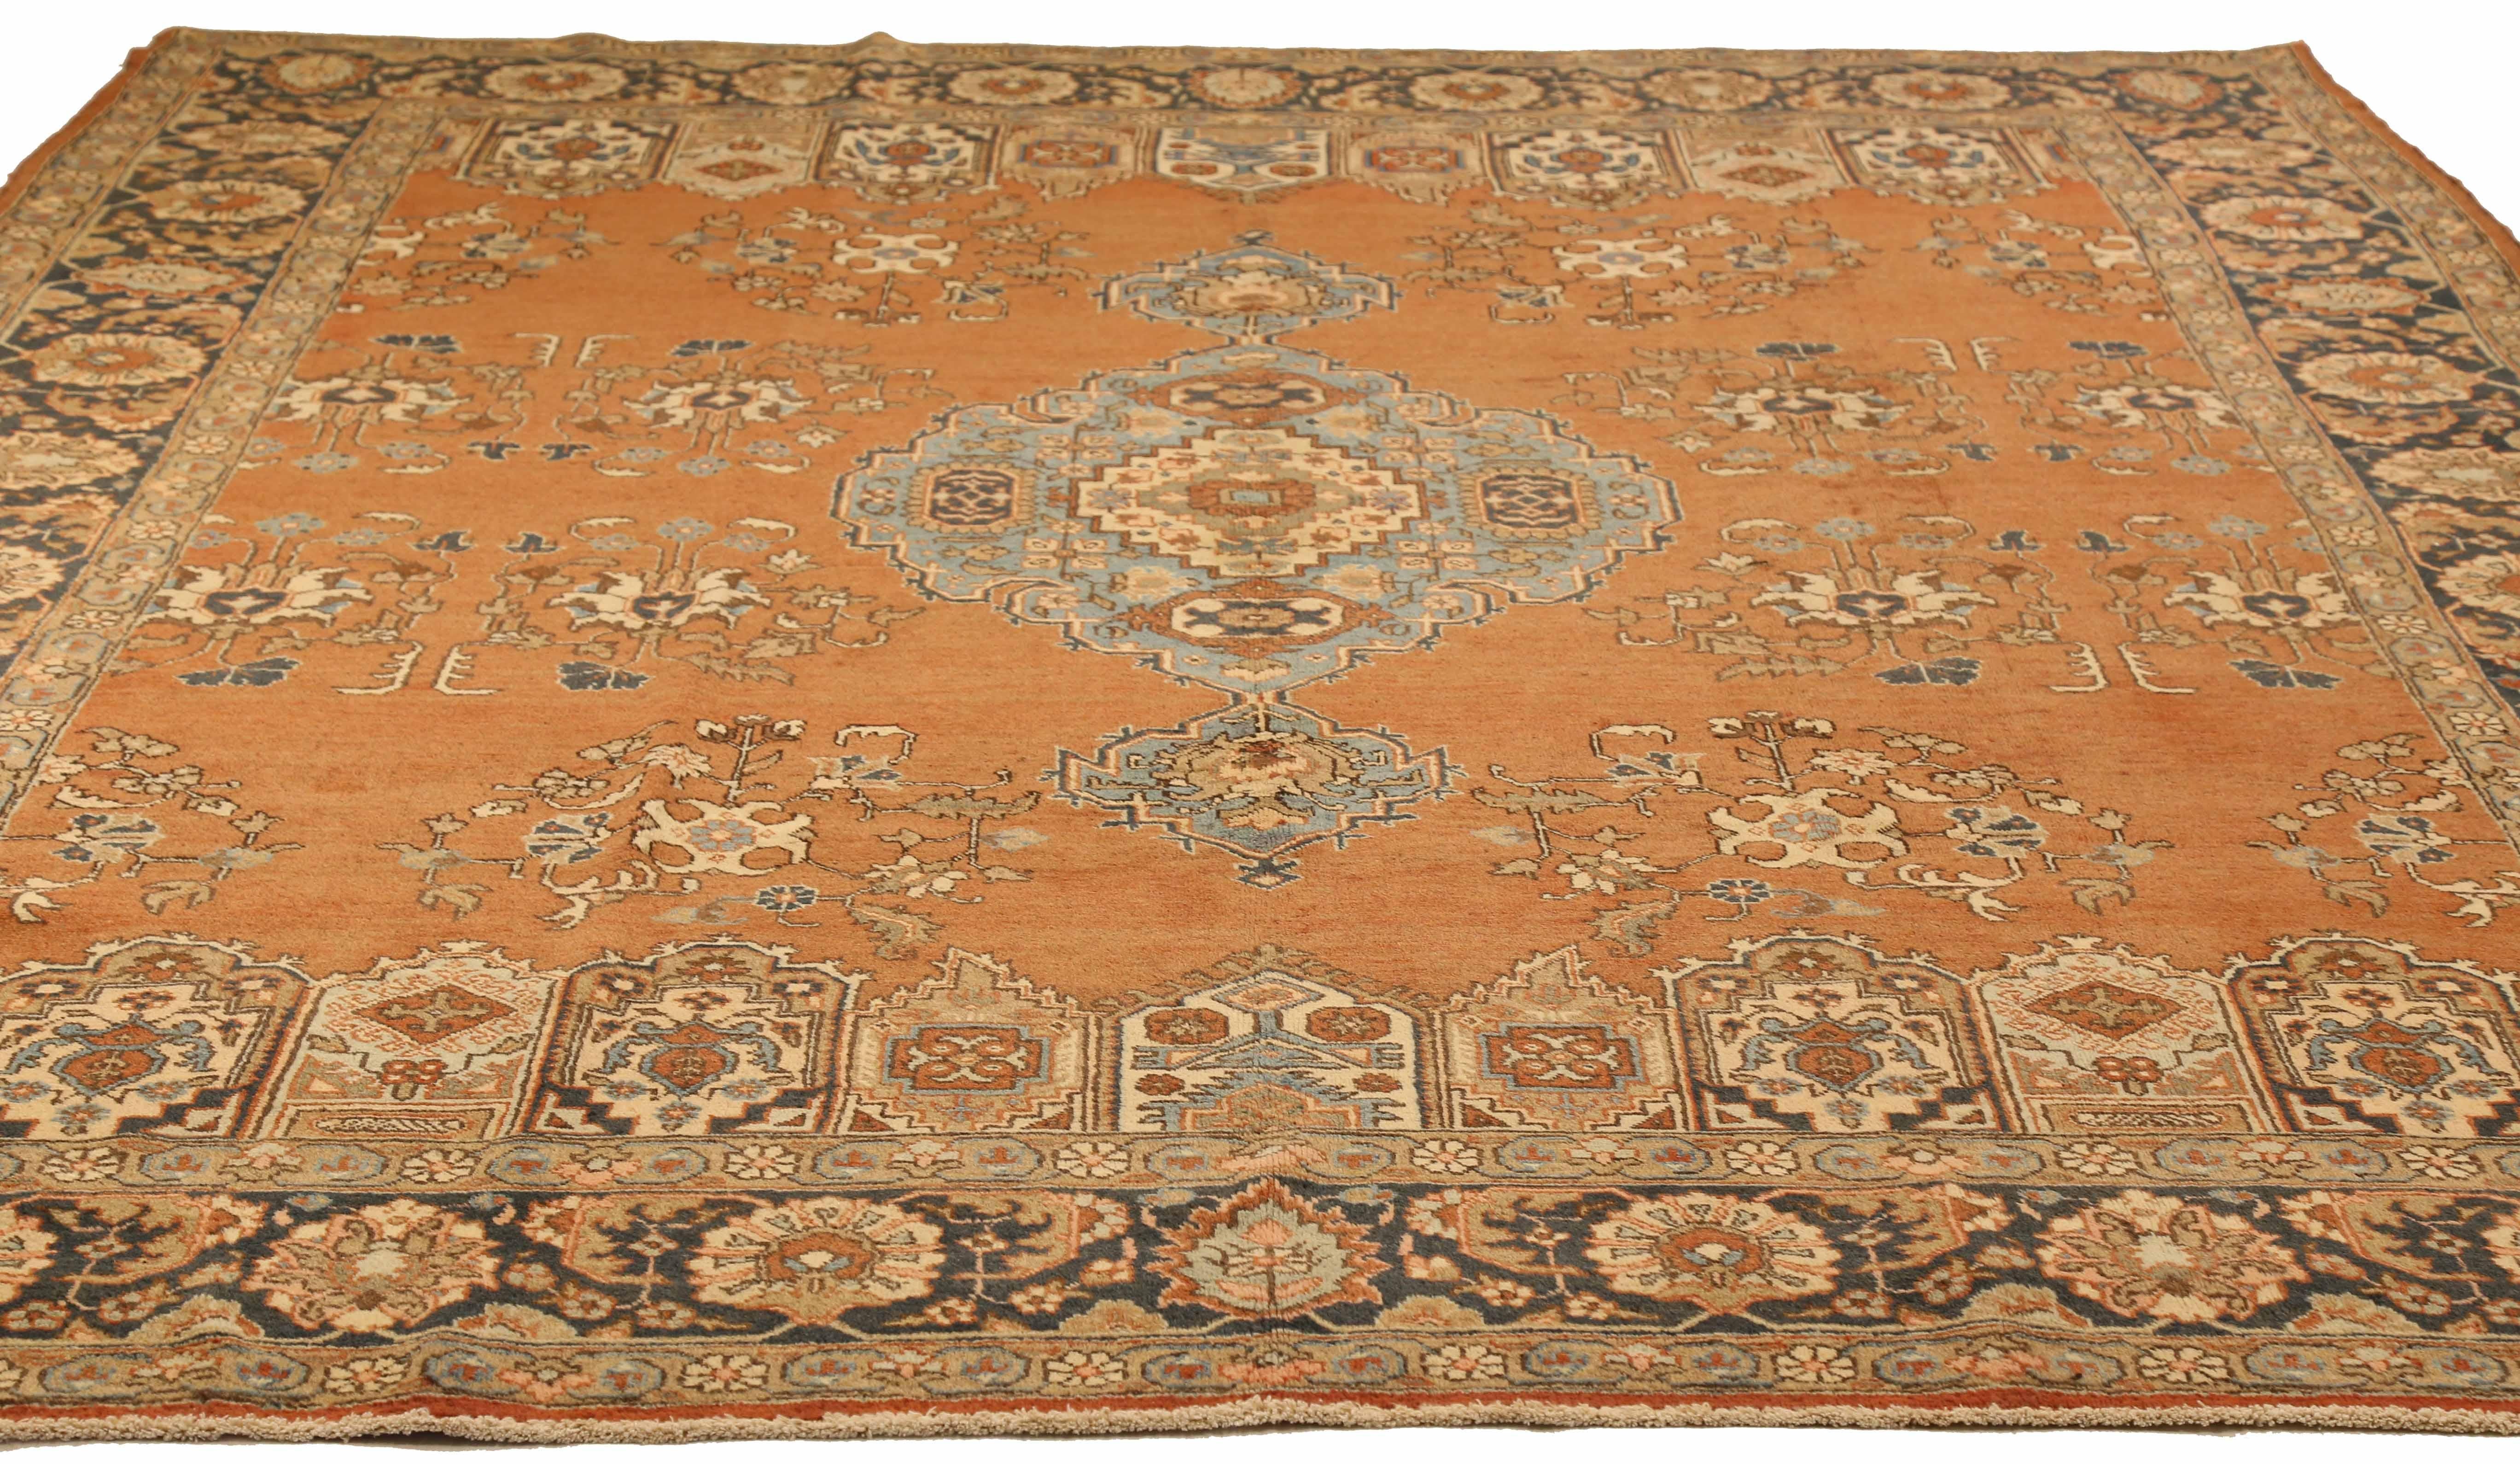 Antique Persian area rug handwoven from the finest sheep’s wool. It’s colored with all-natural vegetable dyes that are safe for humans and pets. It’s a traditional Khoy design handwoven by expert artisans. It’s a lovely area rug that can be